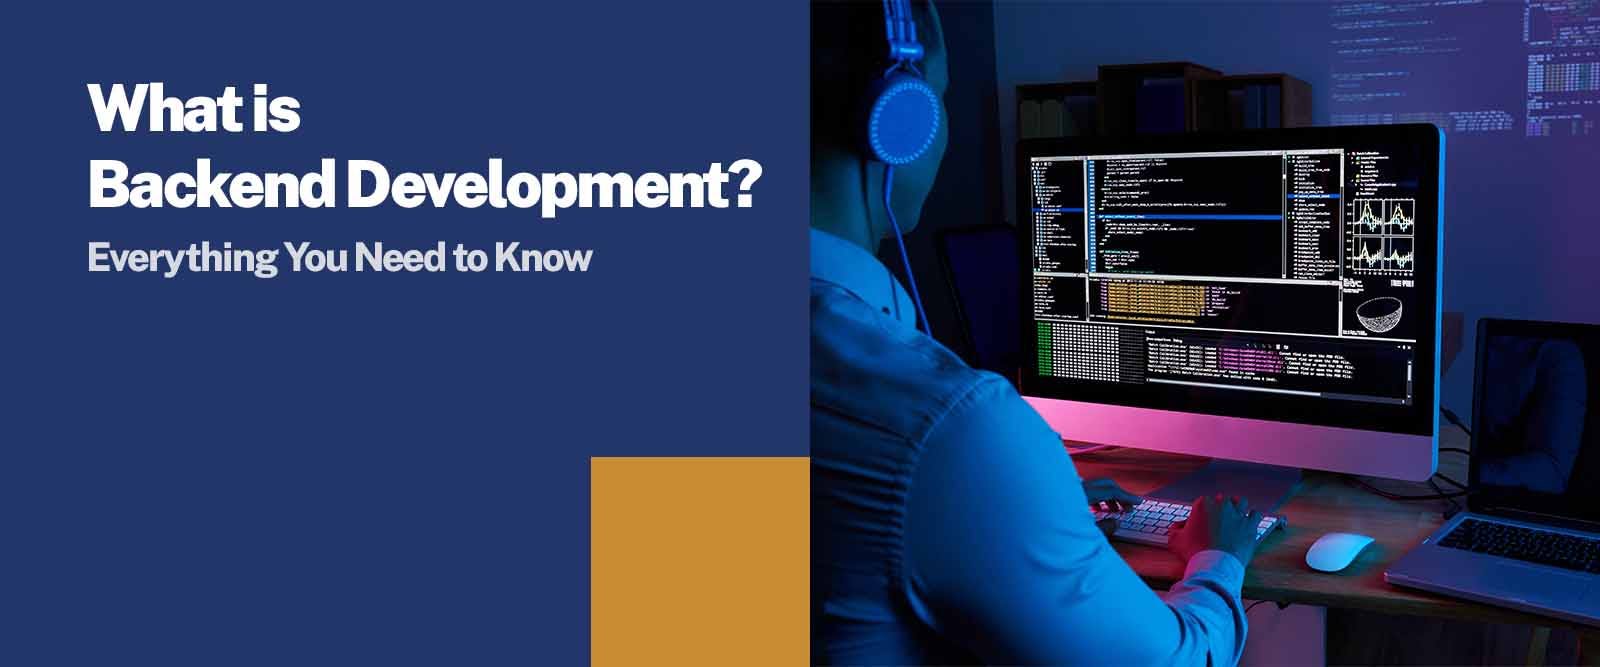 What is Backend Development - Everything You Need to Know